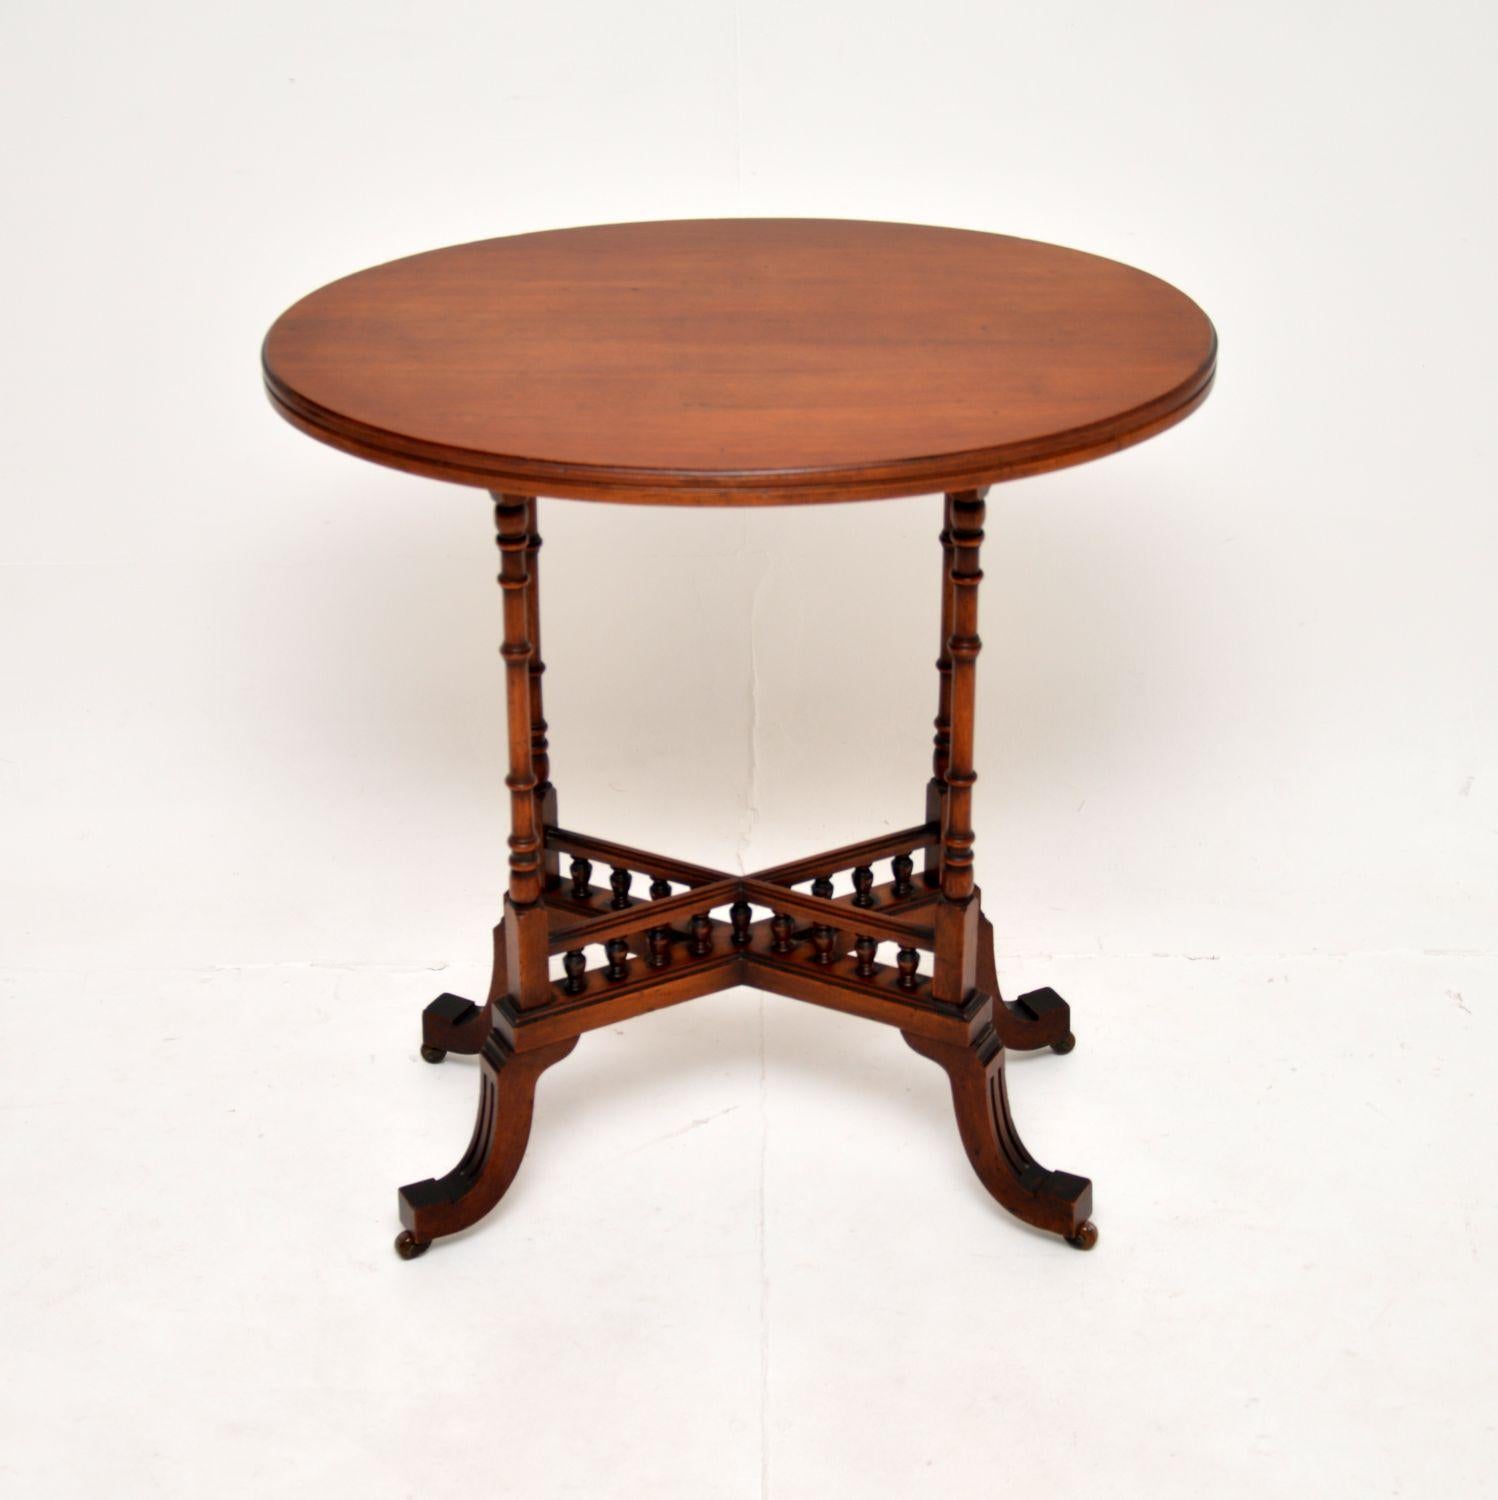 A lovely antique Victorian walnut occasional side table. This was made in England, it dates from around the 1870-1890 period.

It is of superb quality, solid walnut throughout and it has a wonderful design. The solid walnut oval top sits on